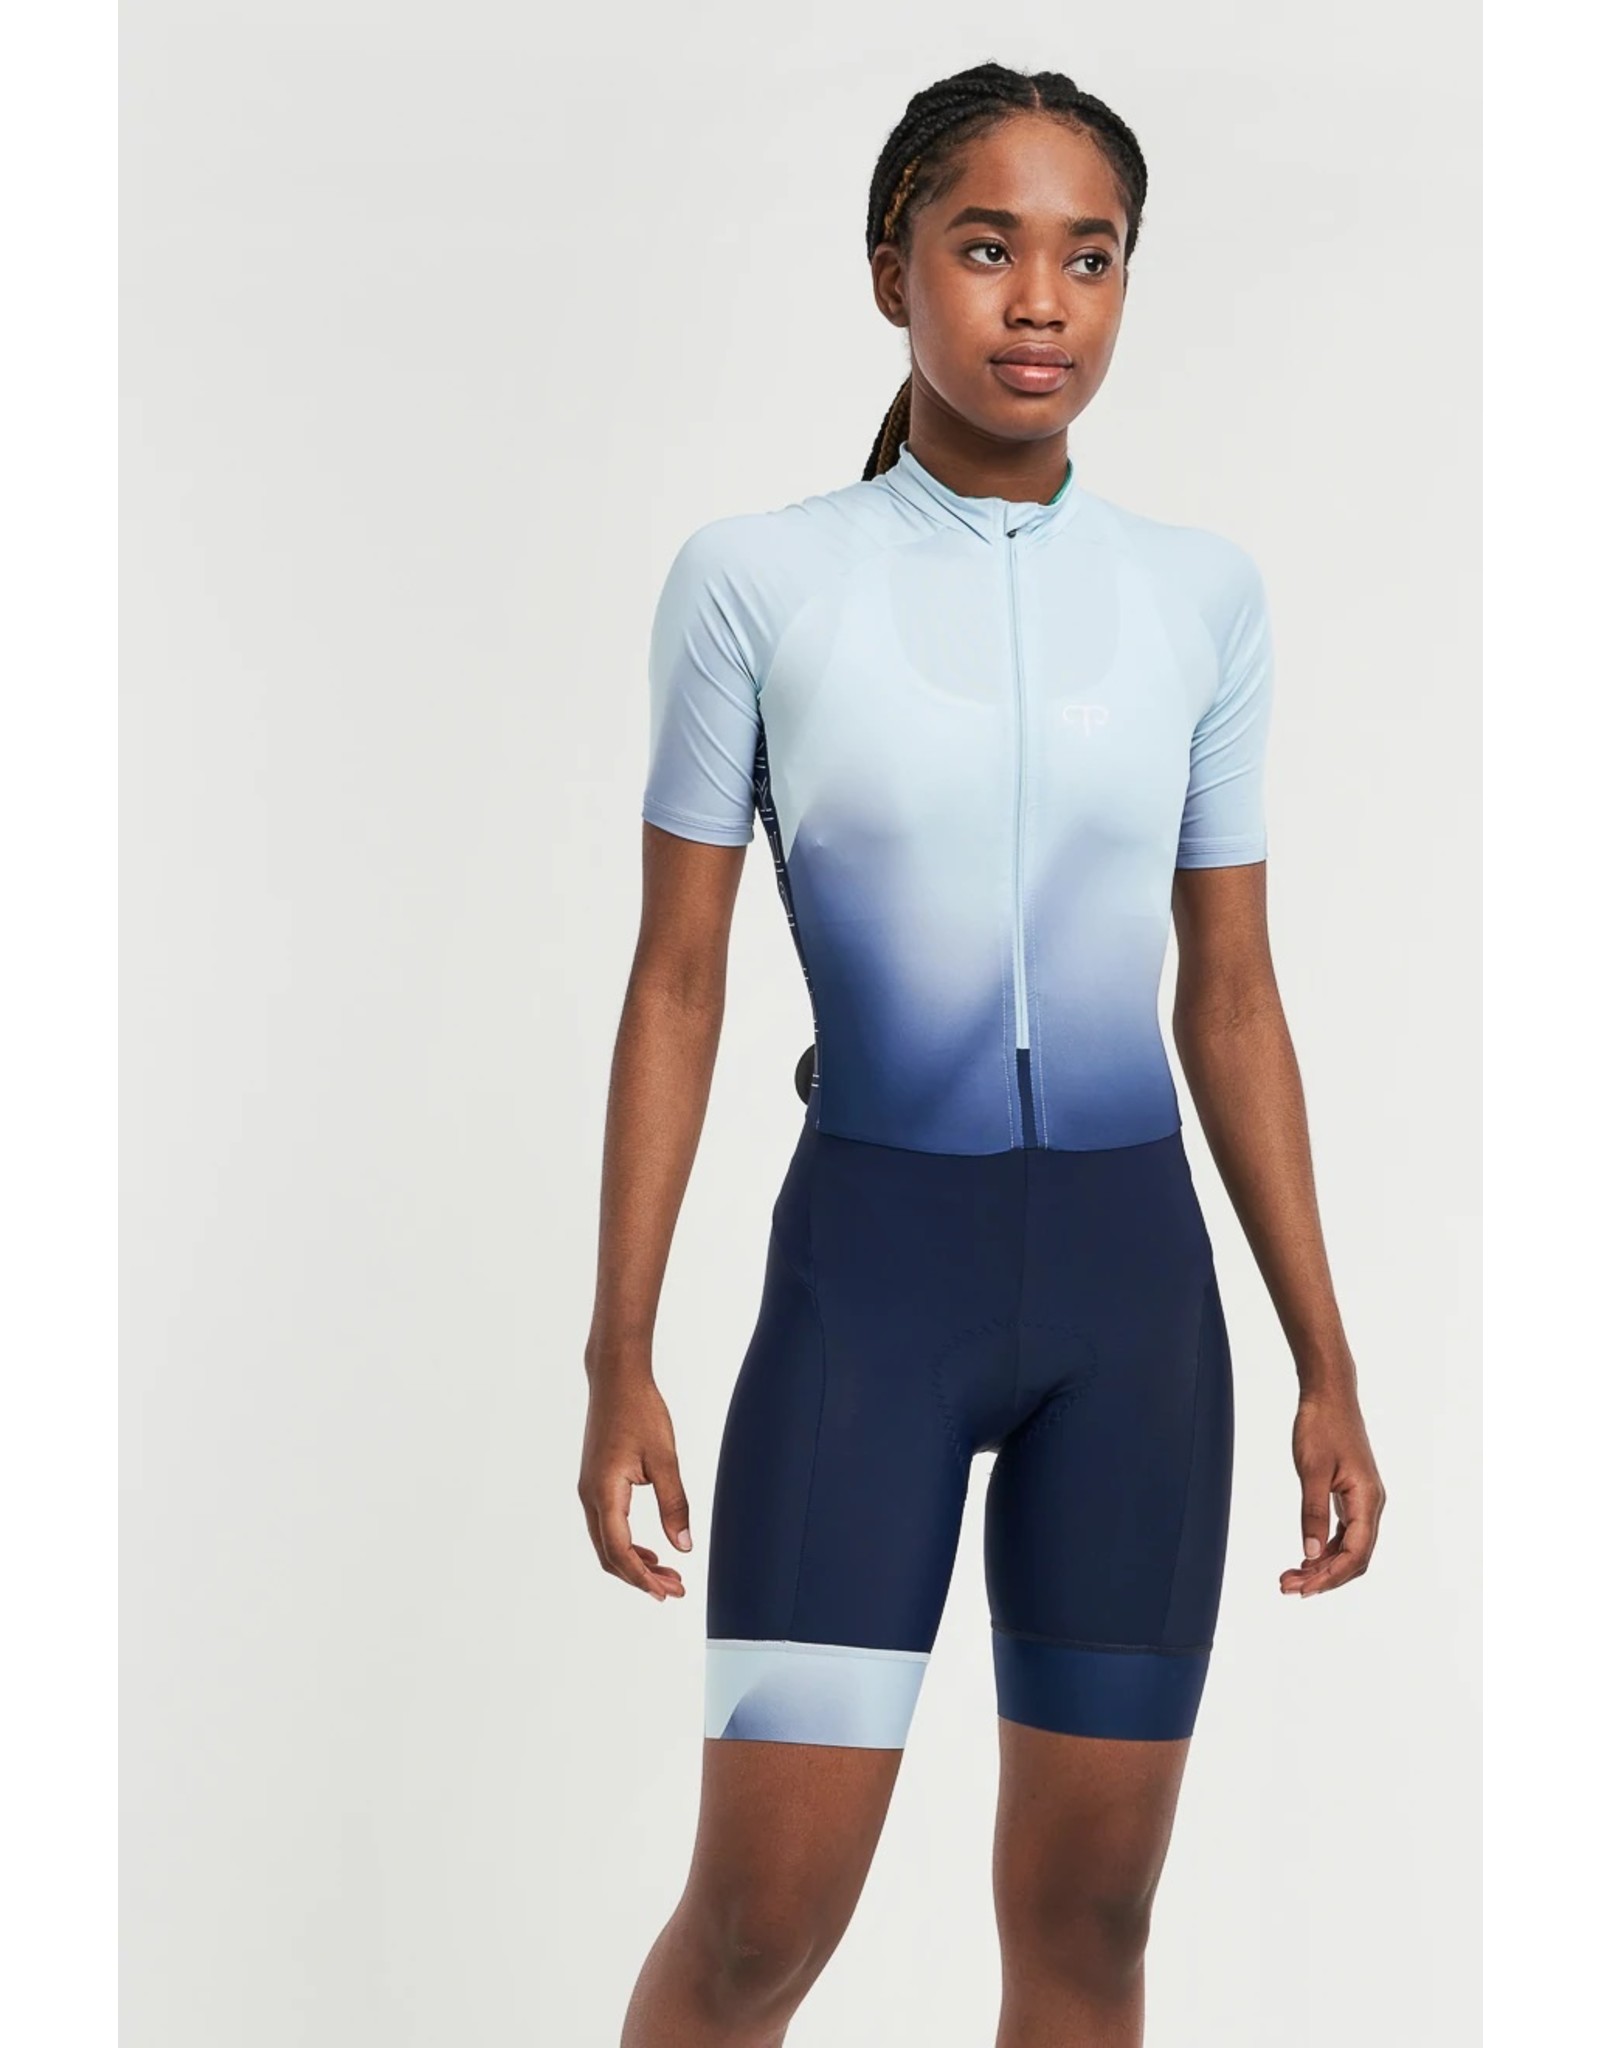 Peppermint '22, PEPPERMINT CYCLING, Signature Skinsuit SS, Courage Light Blue